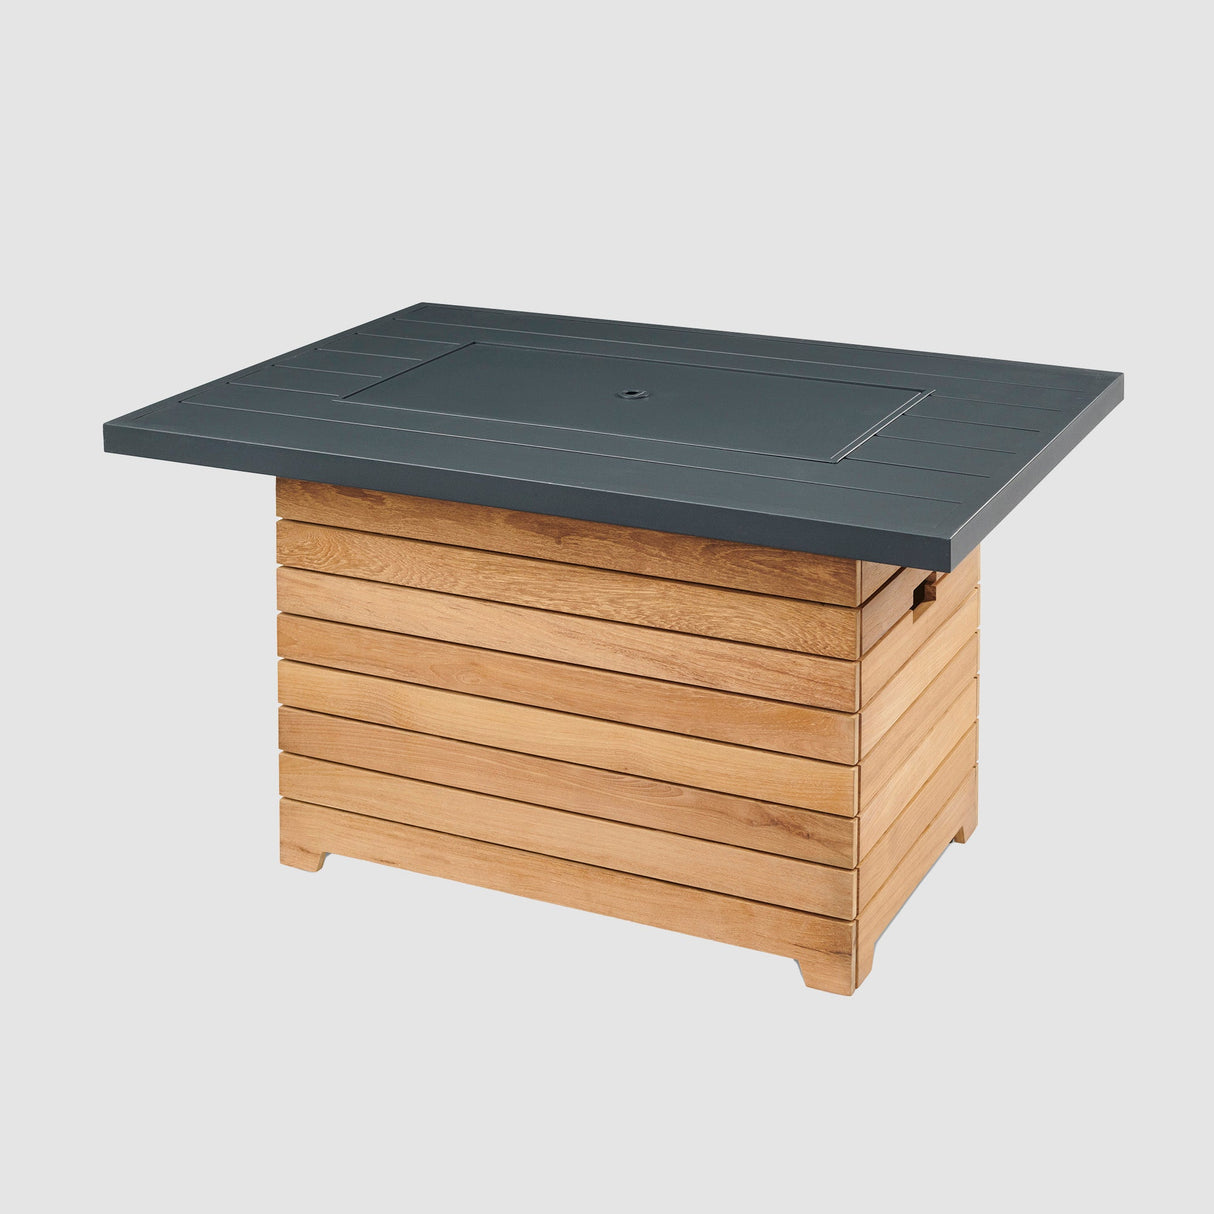 A cover placed on the burner of a Darien Rectangular Gas Fire Pit Table with an Aluminum top